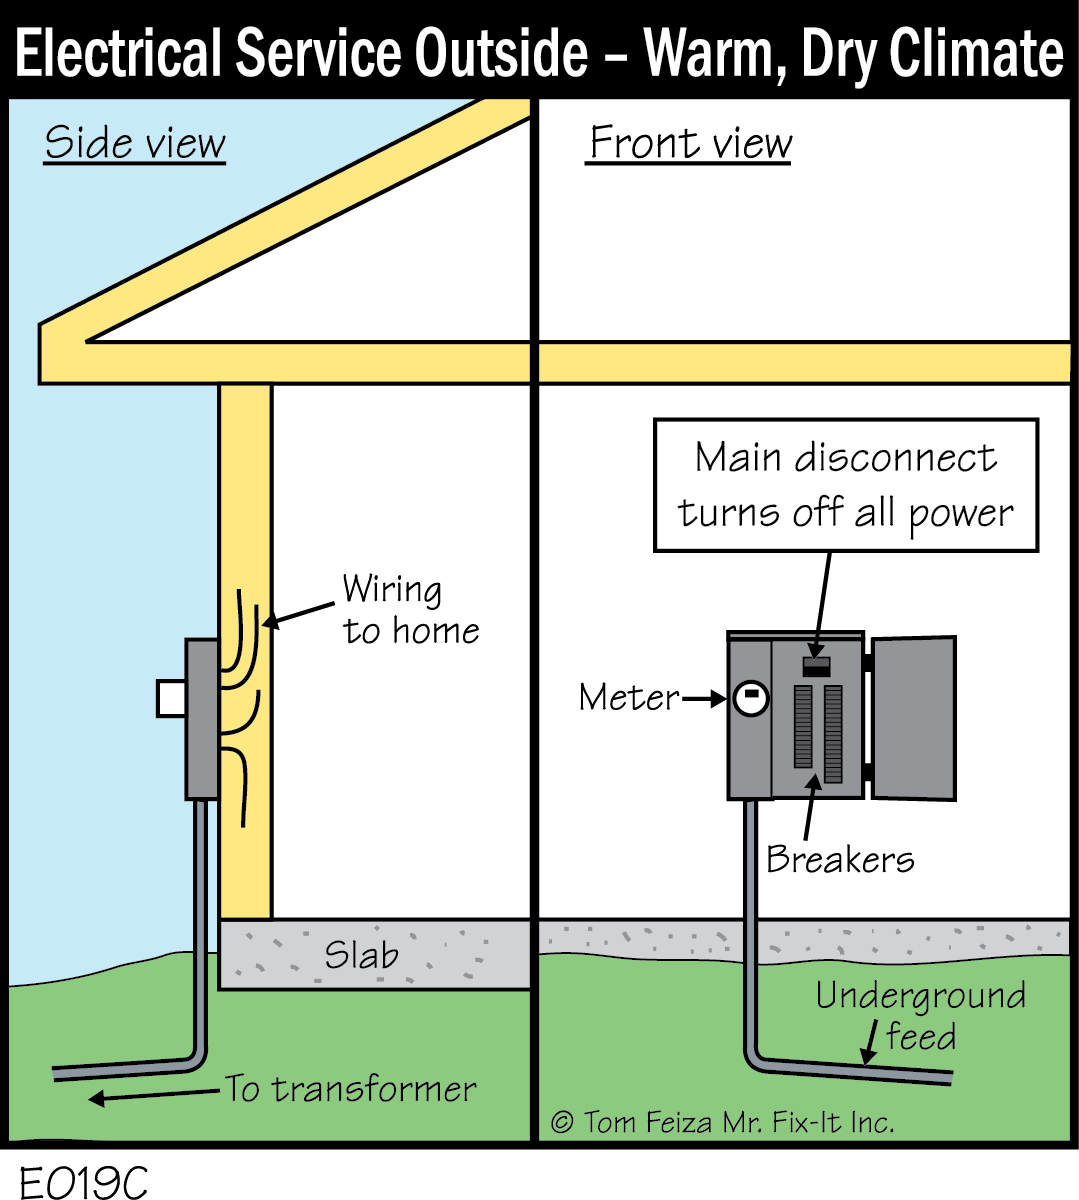 E019C - Electrical Service Outside - Warm, Dry Climate